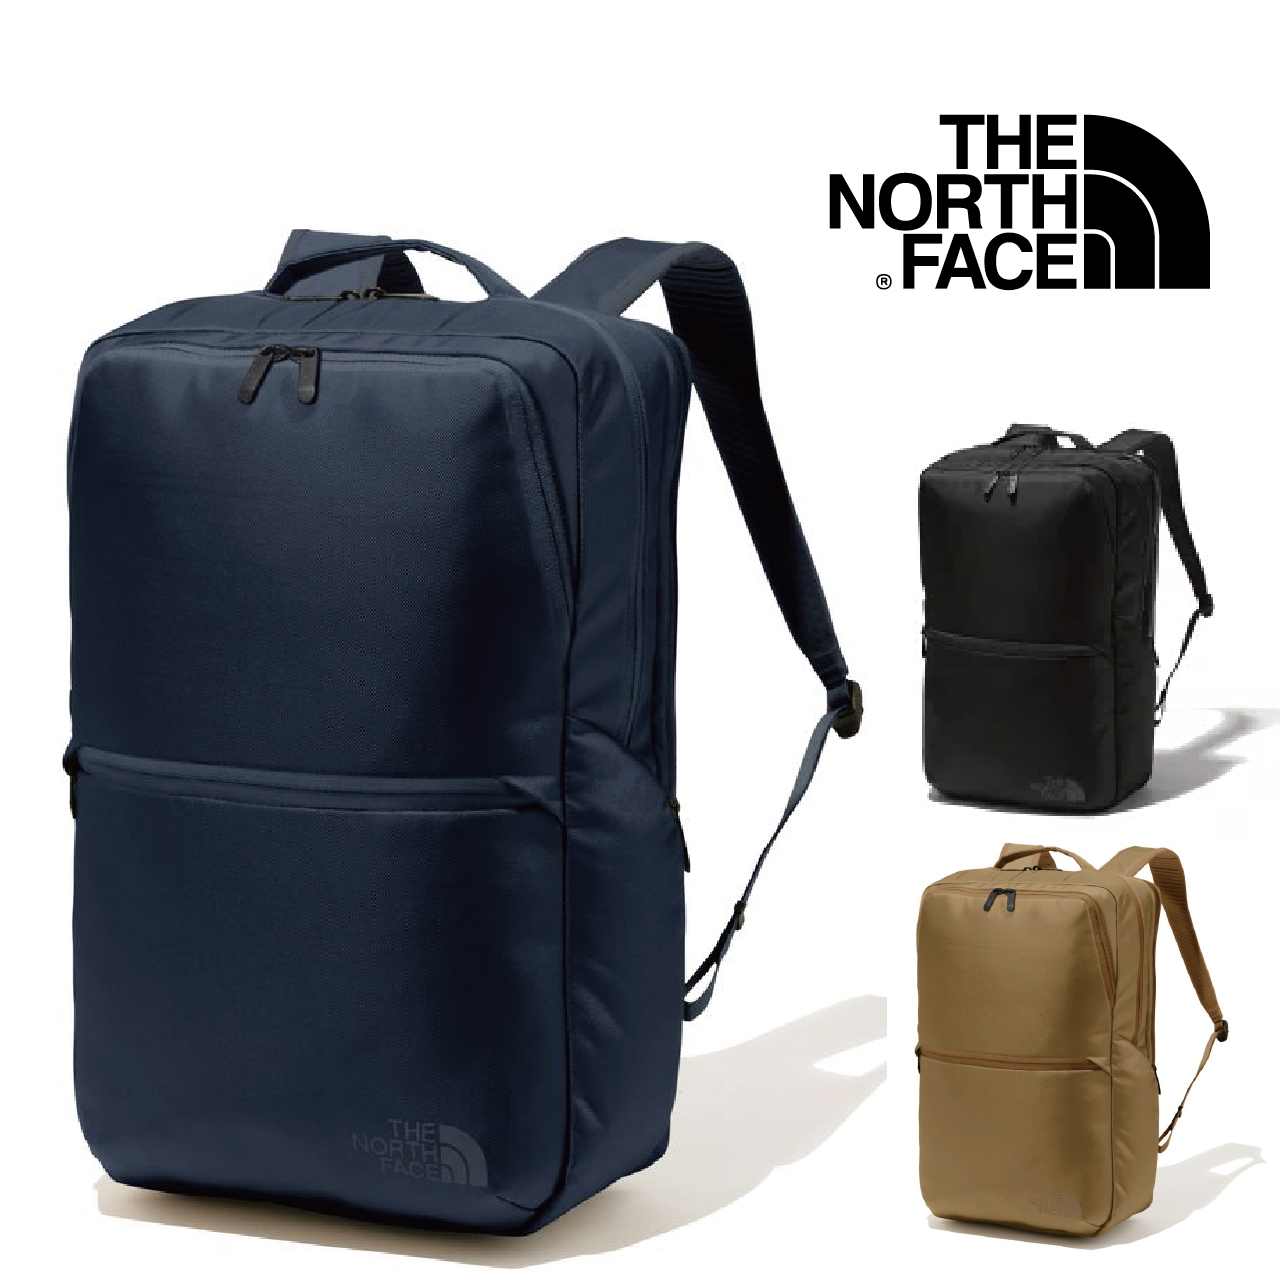 The North Face ビジネスリュック www.krzysztofbialy.com